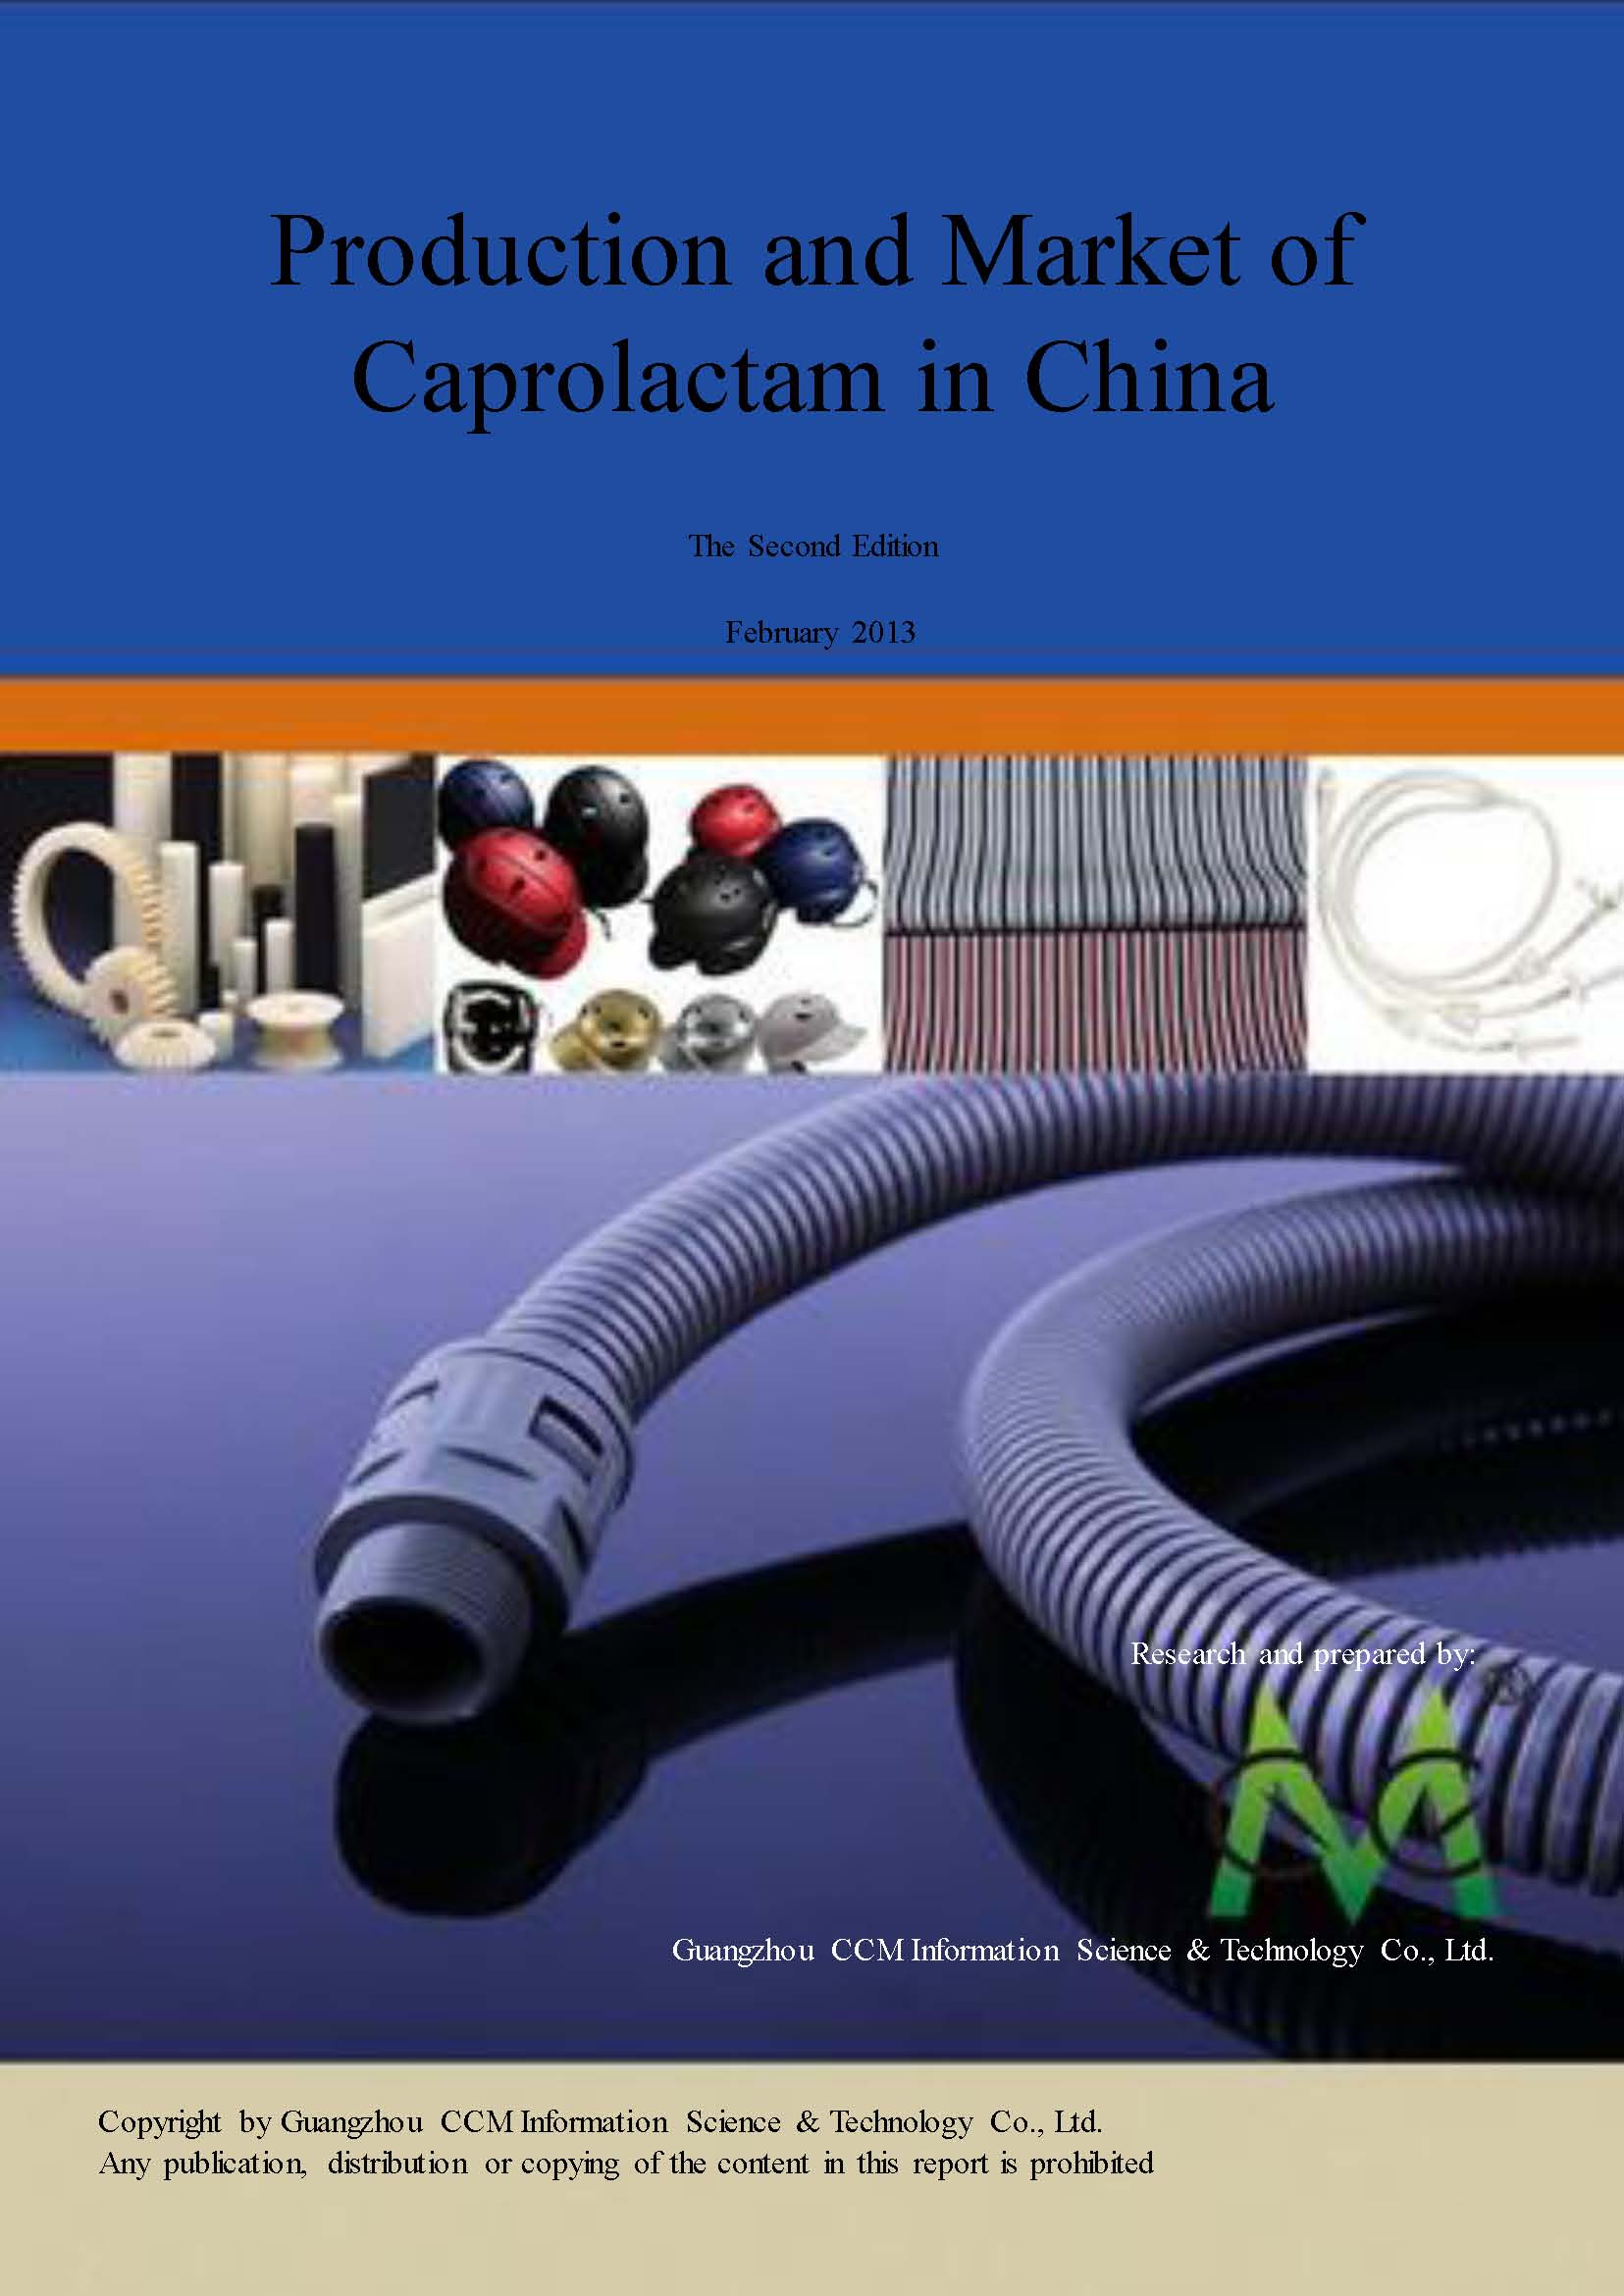 Production and Market of Caprolactam in China